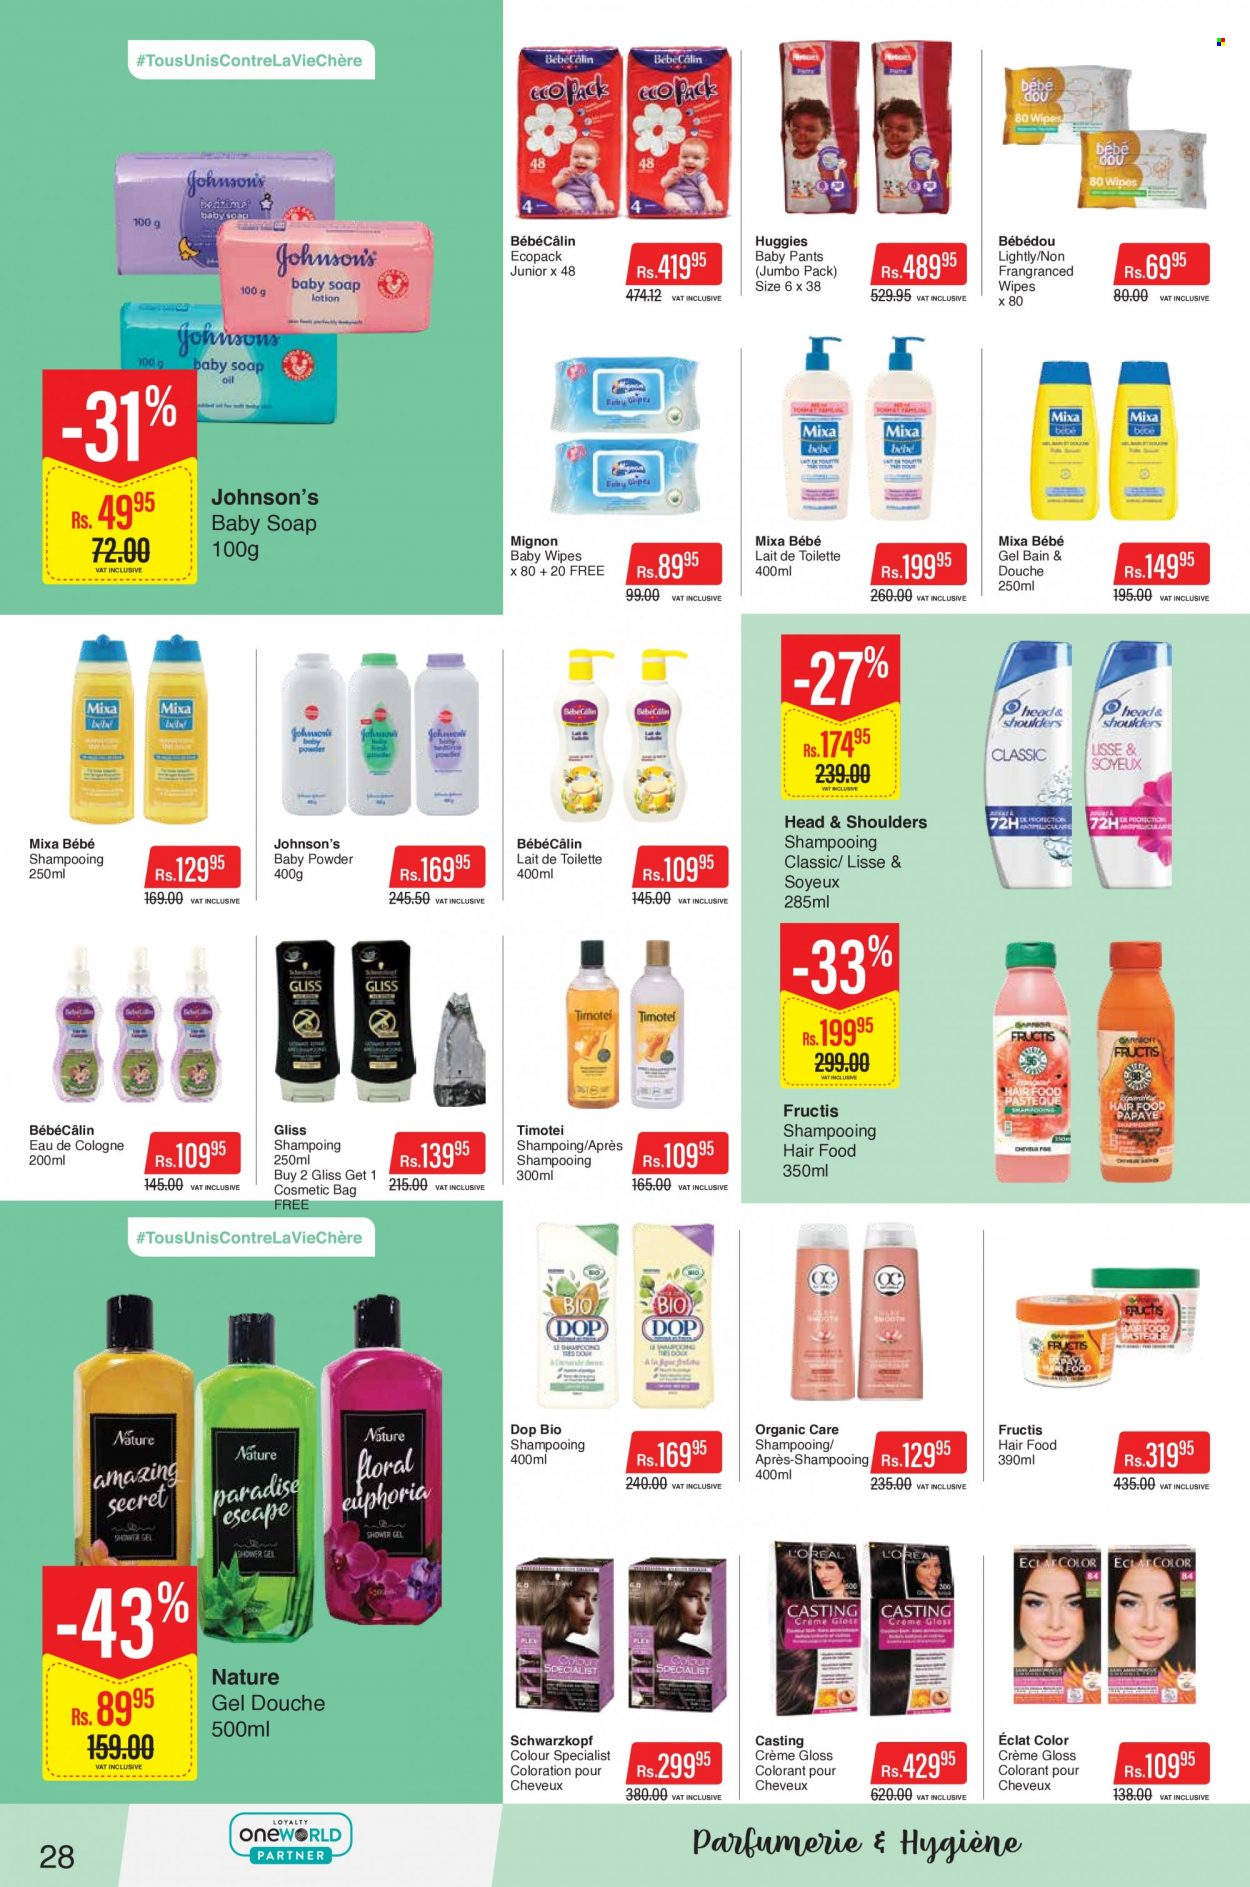 thumbnail - Intermart Catalogue - 23.11.2022 - 20.12.2022 - Sales products - wipes, pants, baby wipes, Johnson's, baby pants, baby powder, Gliss, soap, Fructis, Eclat, cologne, cosmetic bag, Head & Shoulders, Huggies, Schwarzkopf. Page 28.